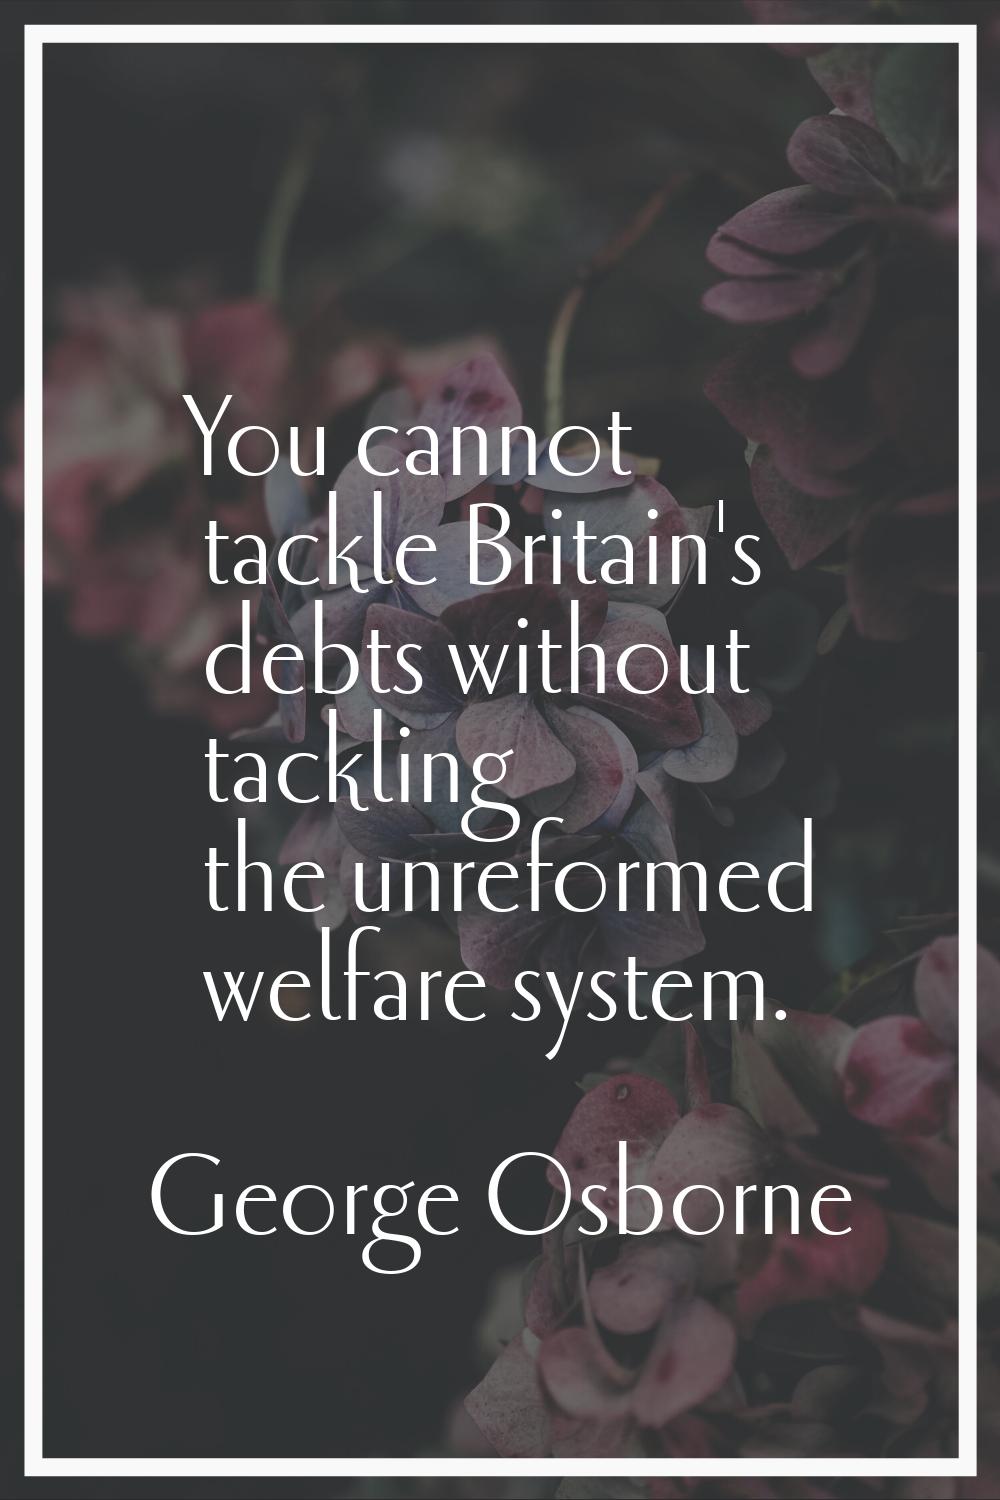 You cannot tackle Britain's debts without tackling the unreformed welfare system.